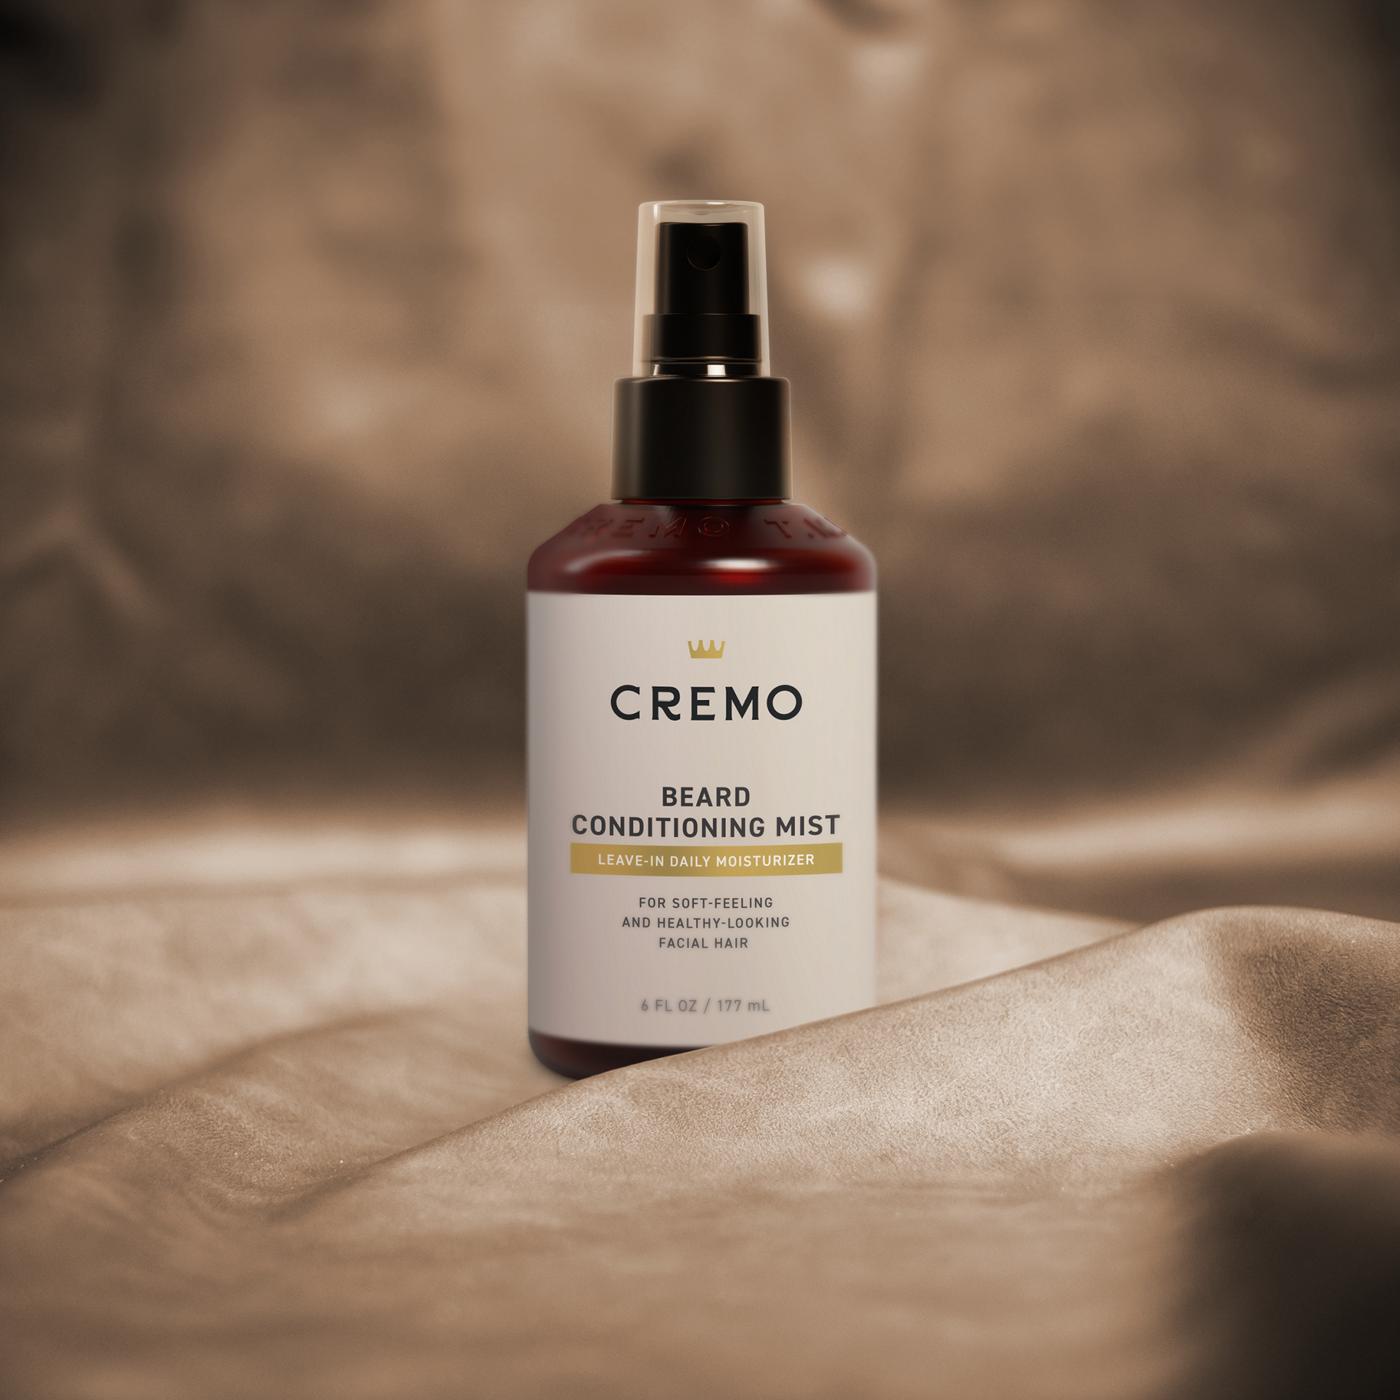 Cremo Beard Conditioning Mist Leave-In Daily Moisturizer; image 4 of 4